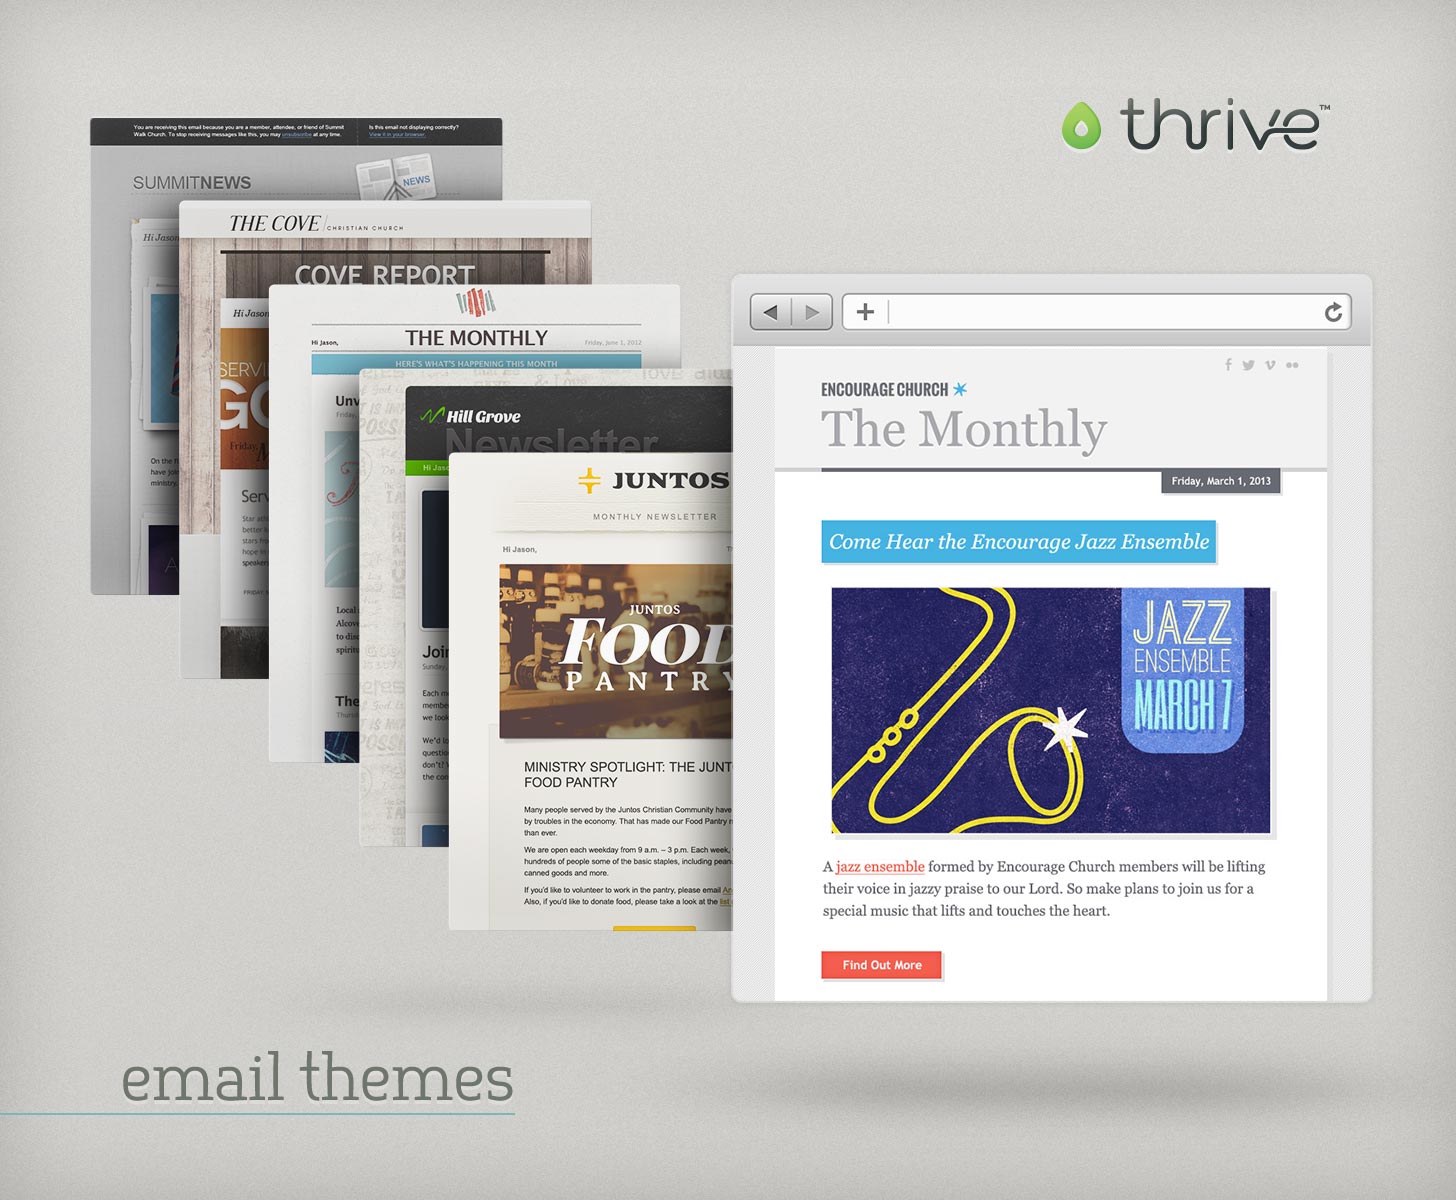 Thrive email themes